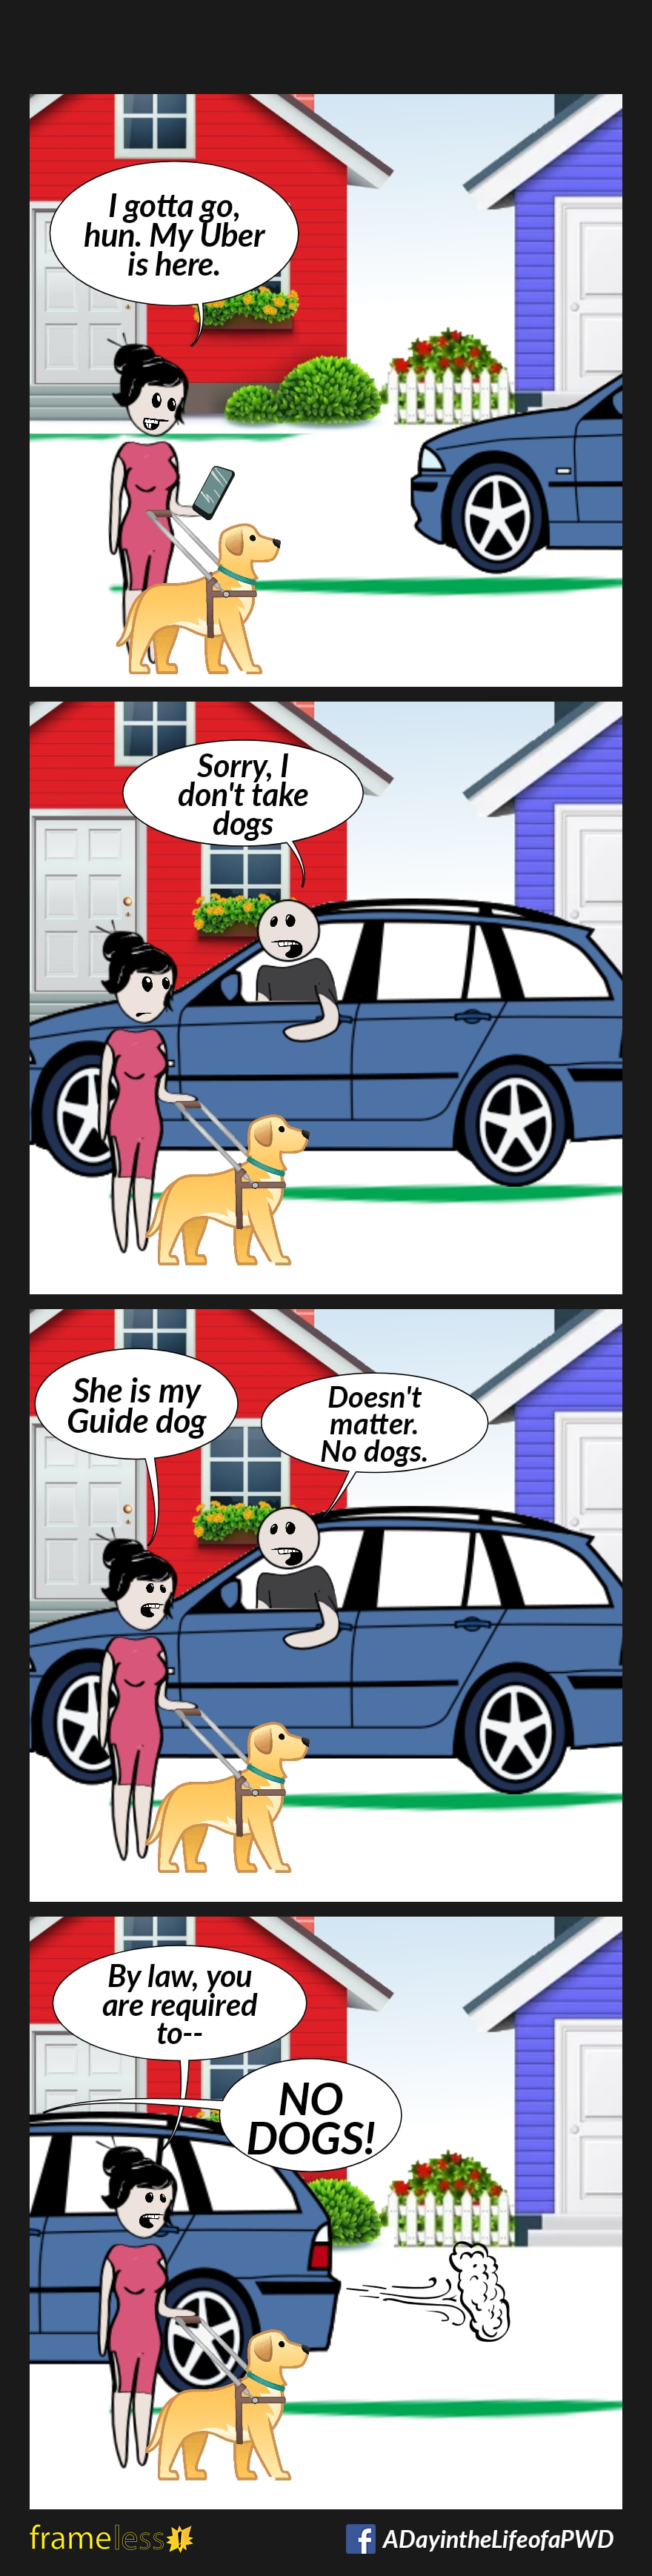 COMIC STRIP 
A Day in the Life of a PWD (Person With a Disability) 

Frame 1:
A woman and her guide dog are outside in a residential area. The woman is on her cell phone. A car is pulling up.
WOMAN: I gotta go, hun. My Uber is here.

Frame 2:
The driver leans out the window.
DRIVER: Sorry, I don't take dogs.

Frame 3:
WOMAN: She is my Guide dog.
DRIVER: Doesn't matter. No dogs. 

Frame 4:
WOMAN: By law, you are required to--
The car speeds away, cutting her off.
DRIVER: NO DOGS!